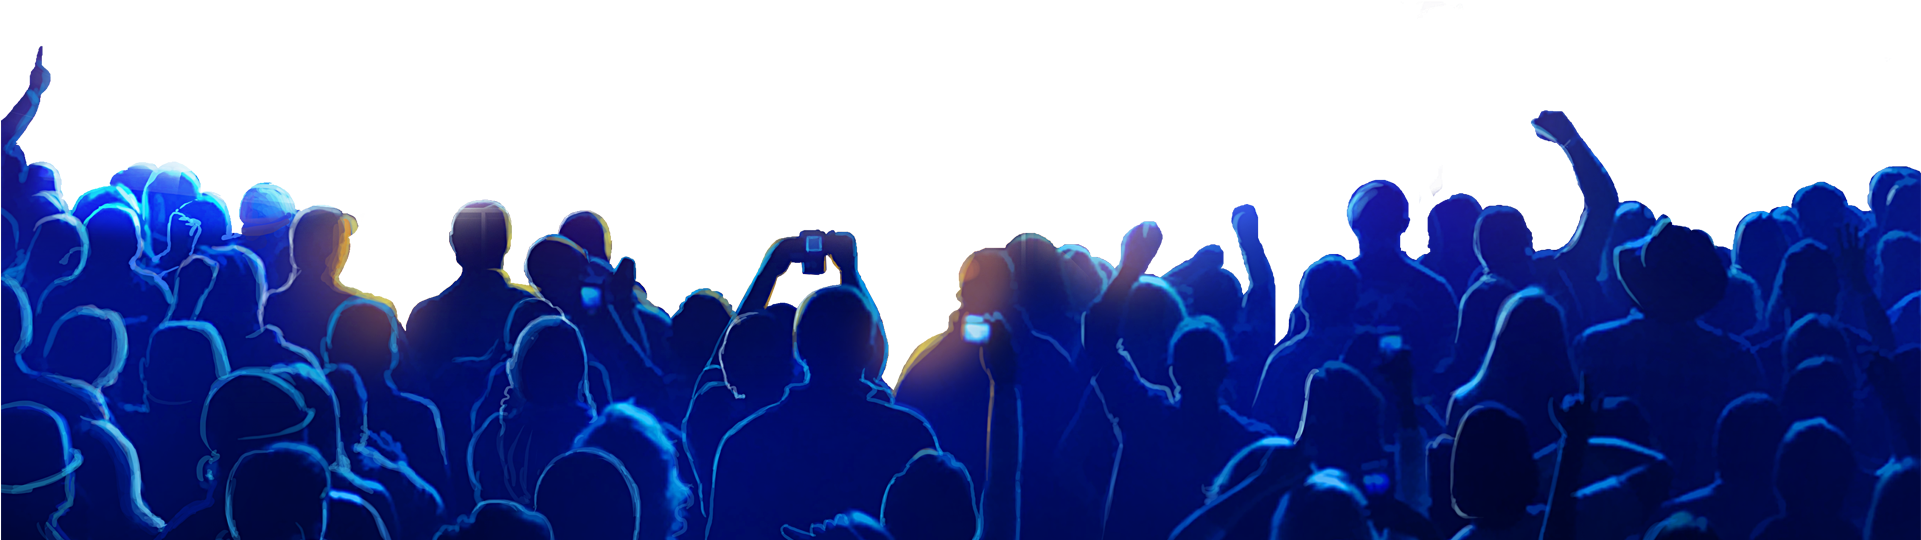 Concert PNG Clipart Background